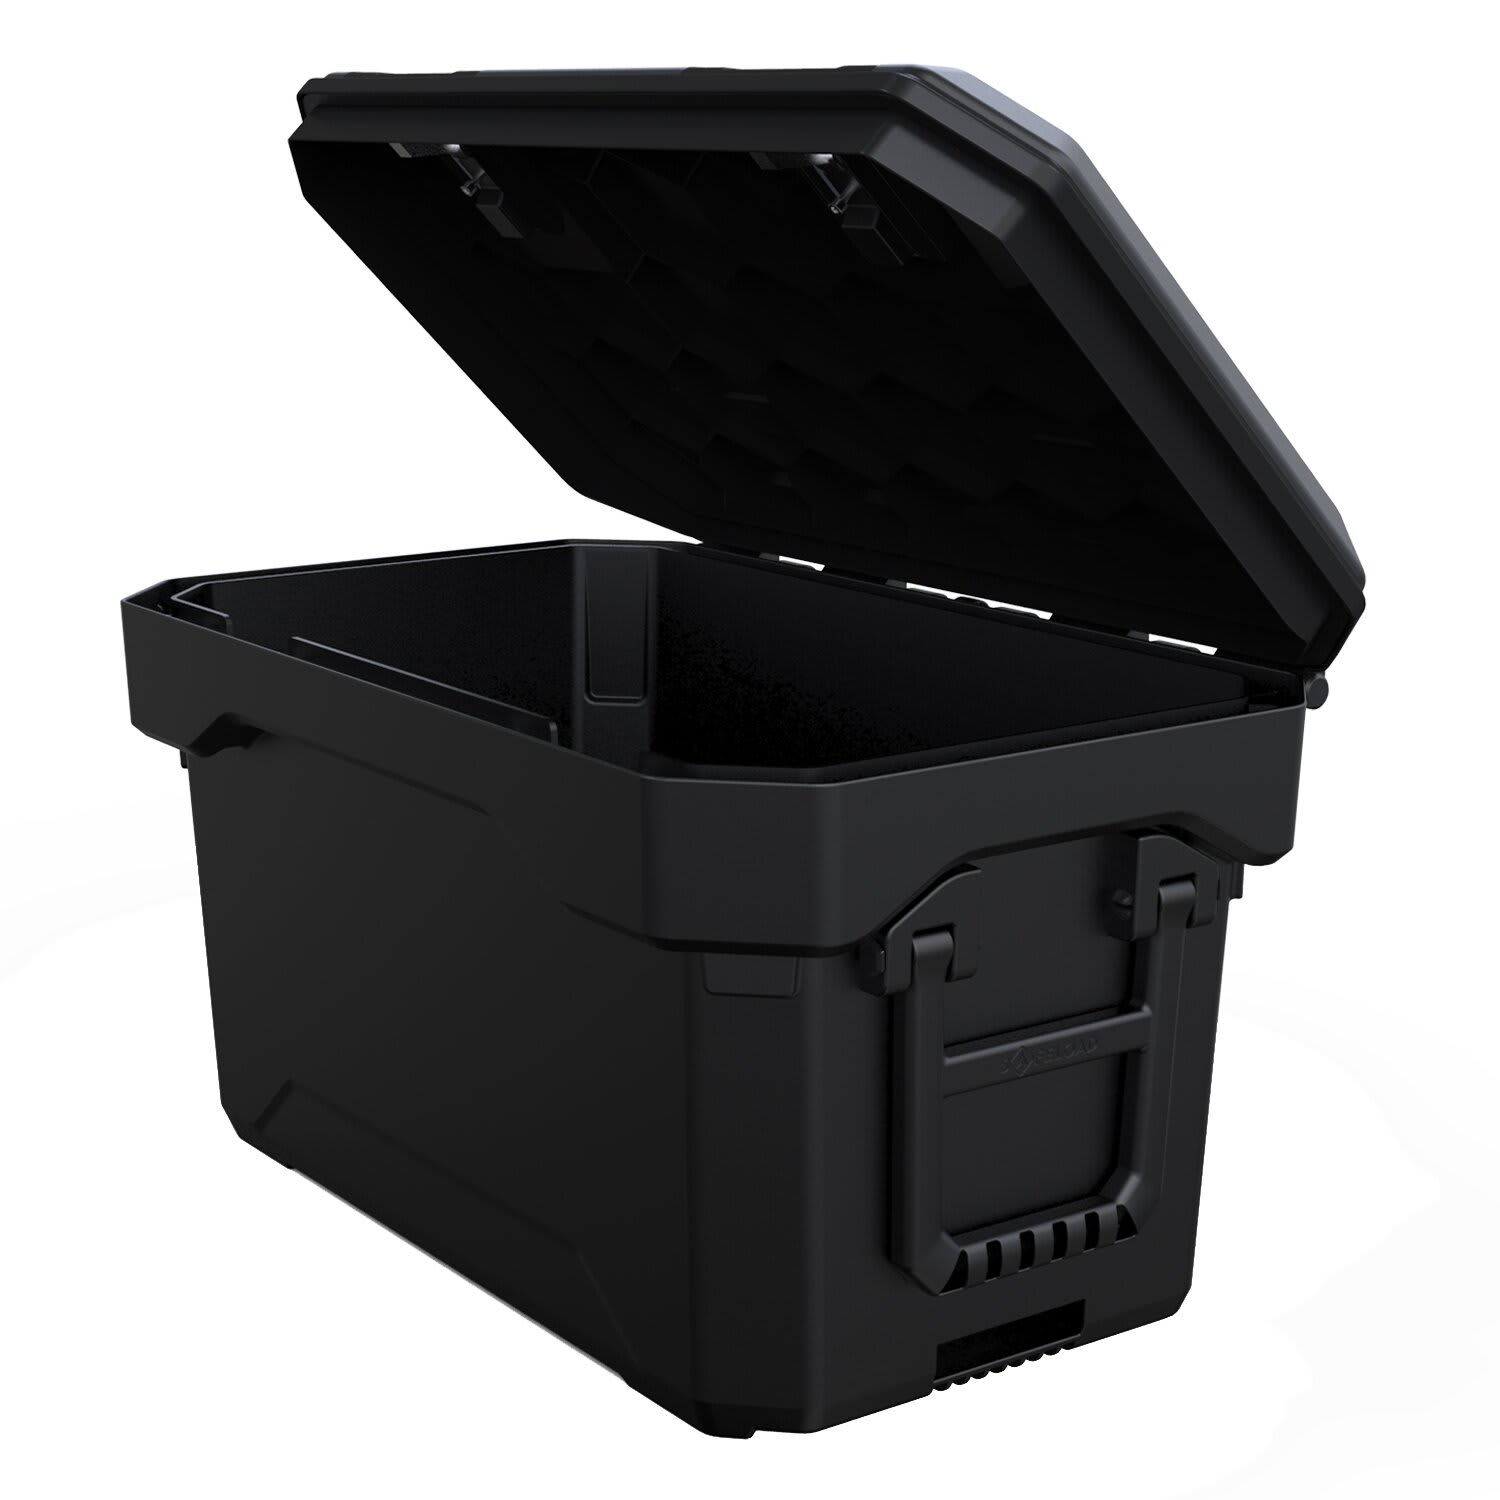 Safeload - Our Dura Tough Box 1200 is a durable and robust box